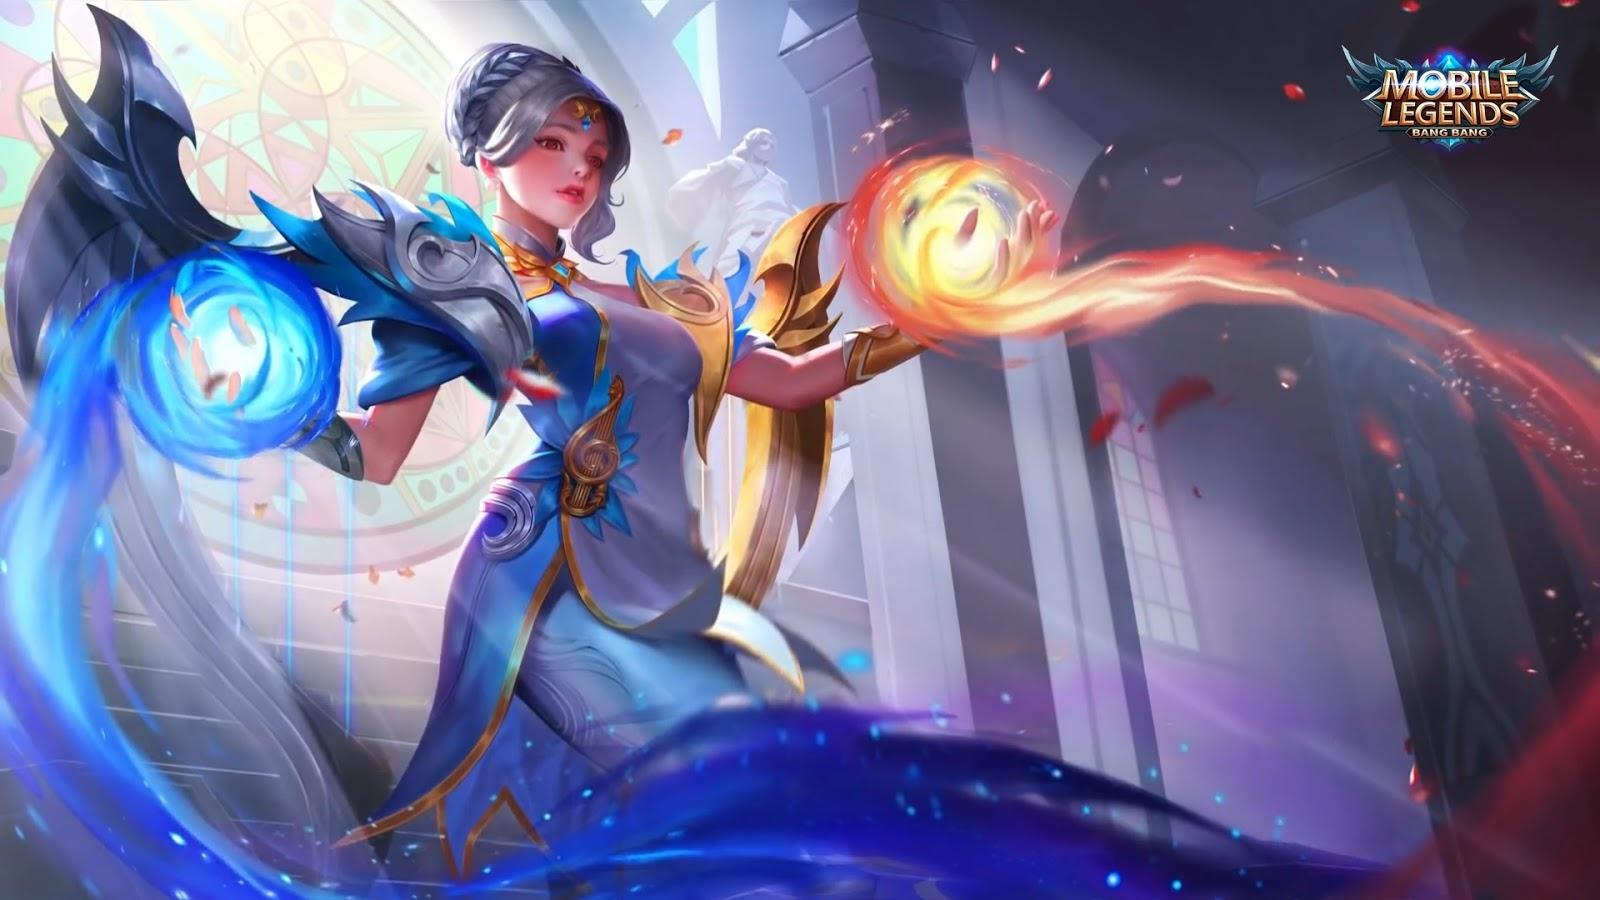 Who is the best mage in Mobile Legends?